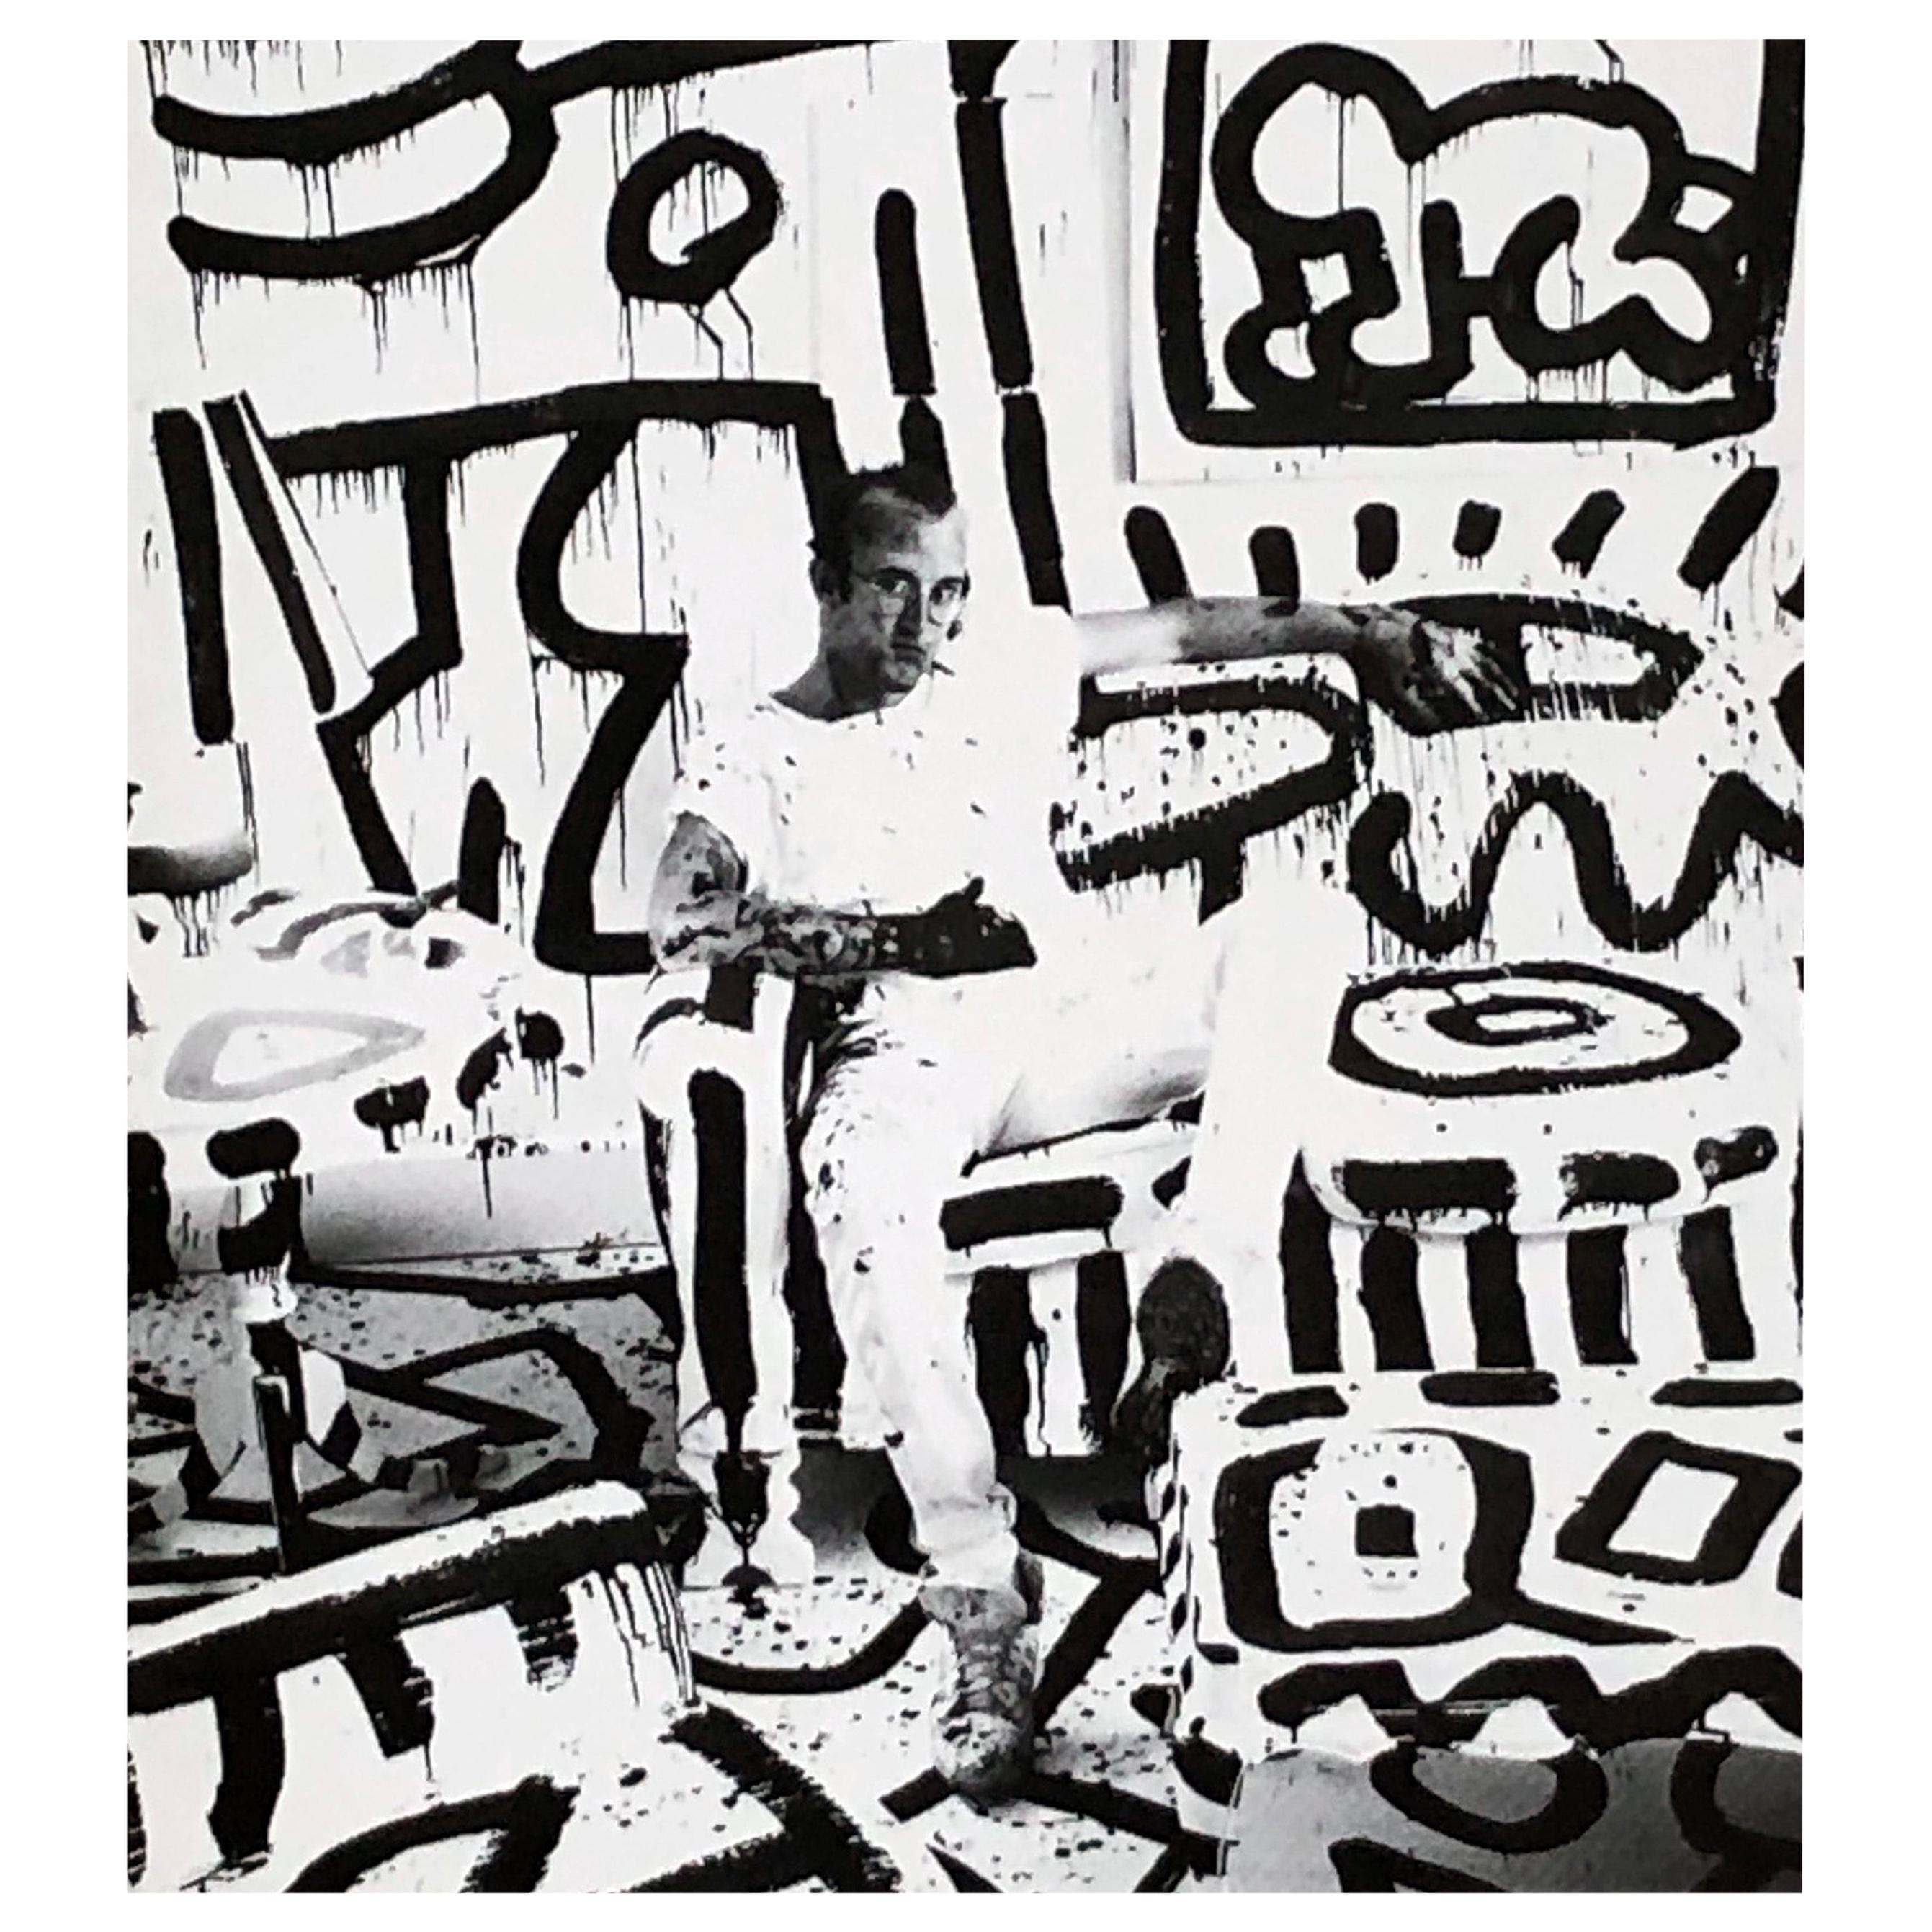 Keith Haring at Area Nightclub, New York, 1986:
Rare vintage 1986 announcement for a Splash Magazine event at the historic 1980s New York Area nightclub hosted by Keith Haring. Features a Classic photo of Keith Haring in his studio that make for a